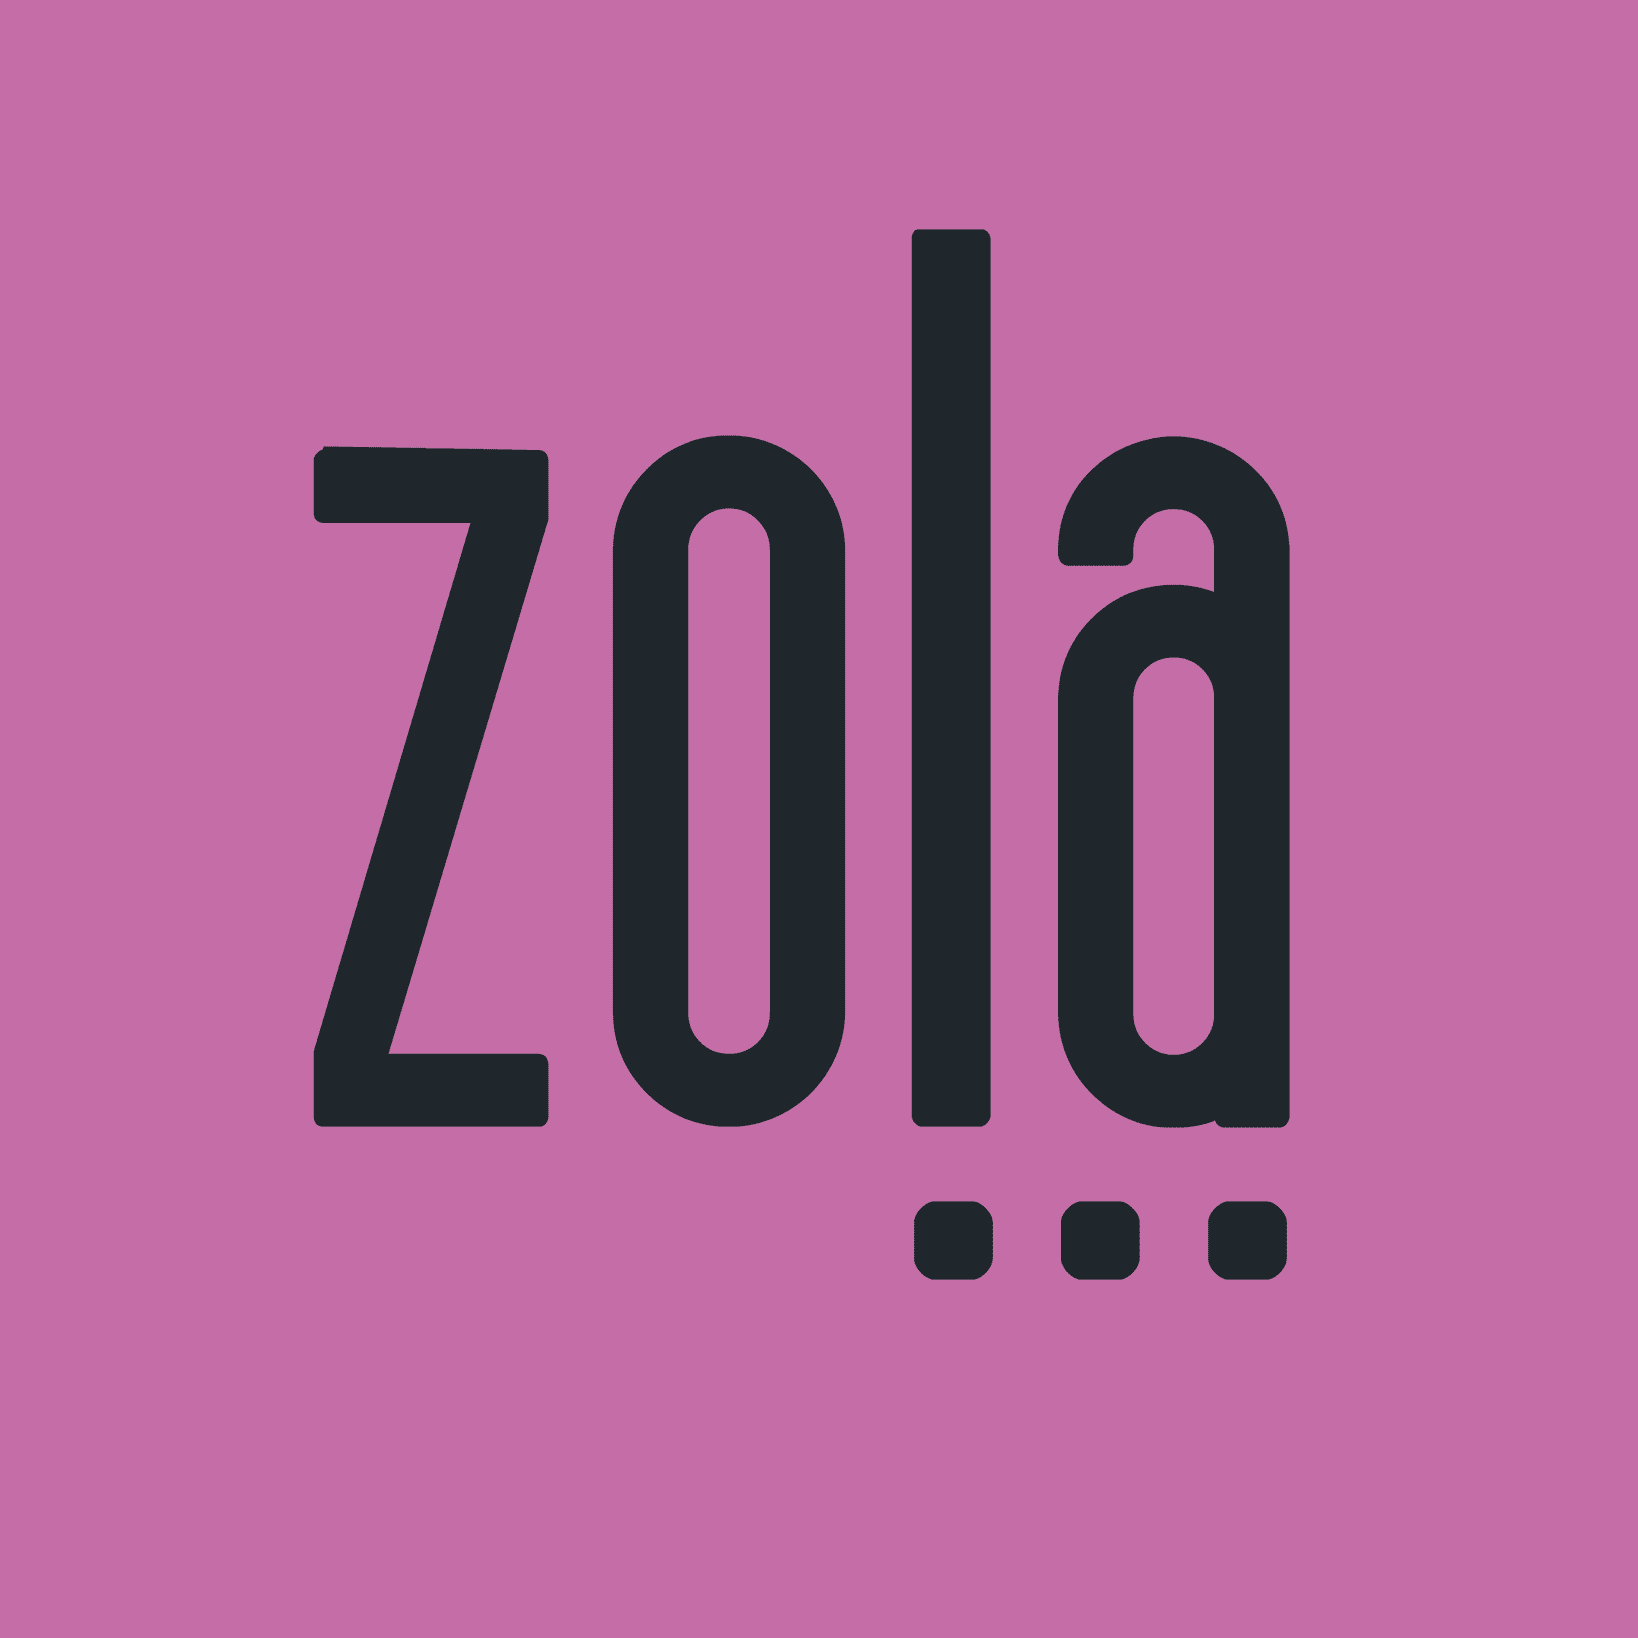 Logo for Zola (word art, black text on purple background, with 3 dots under "l" and "a")